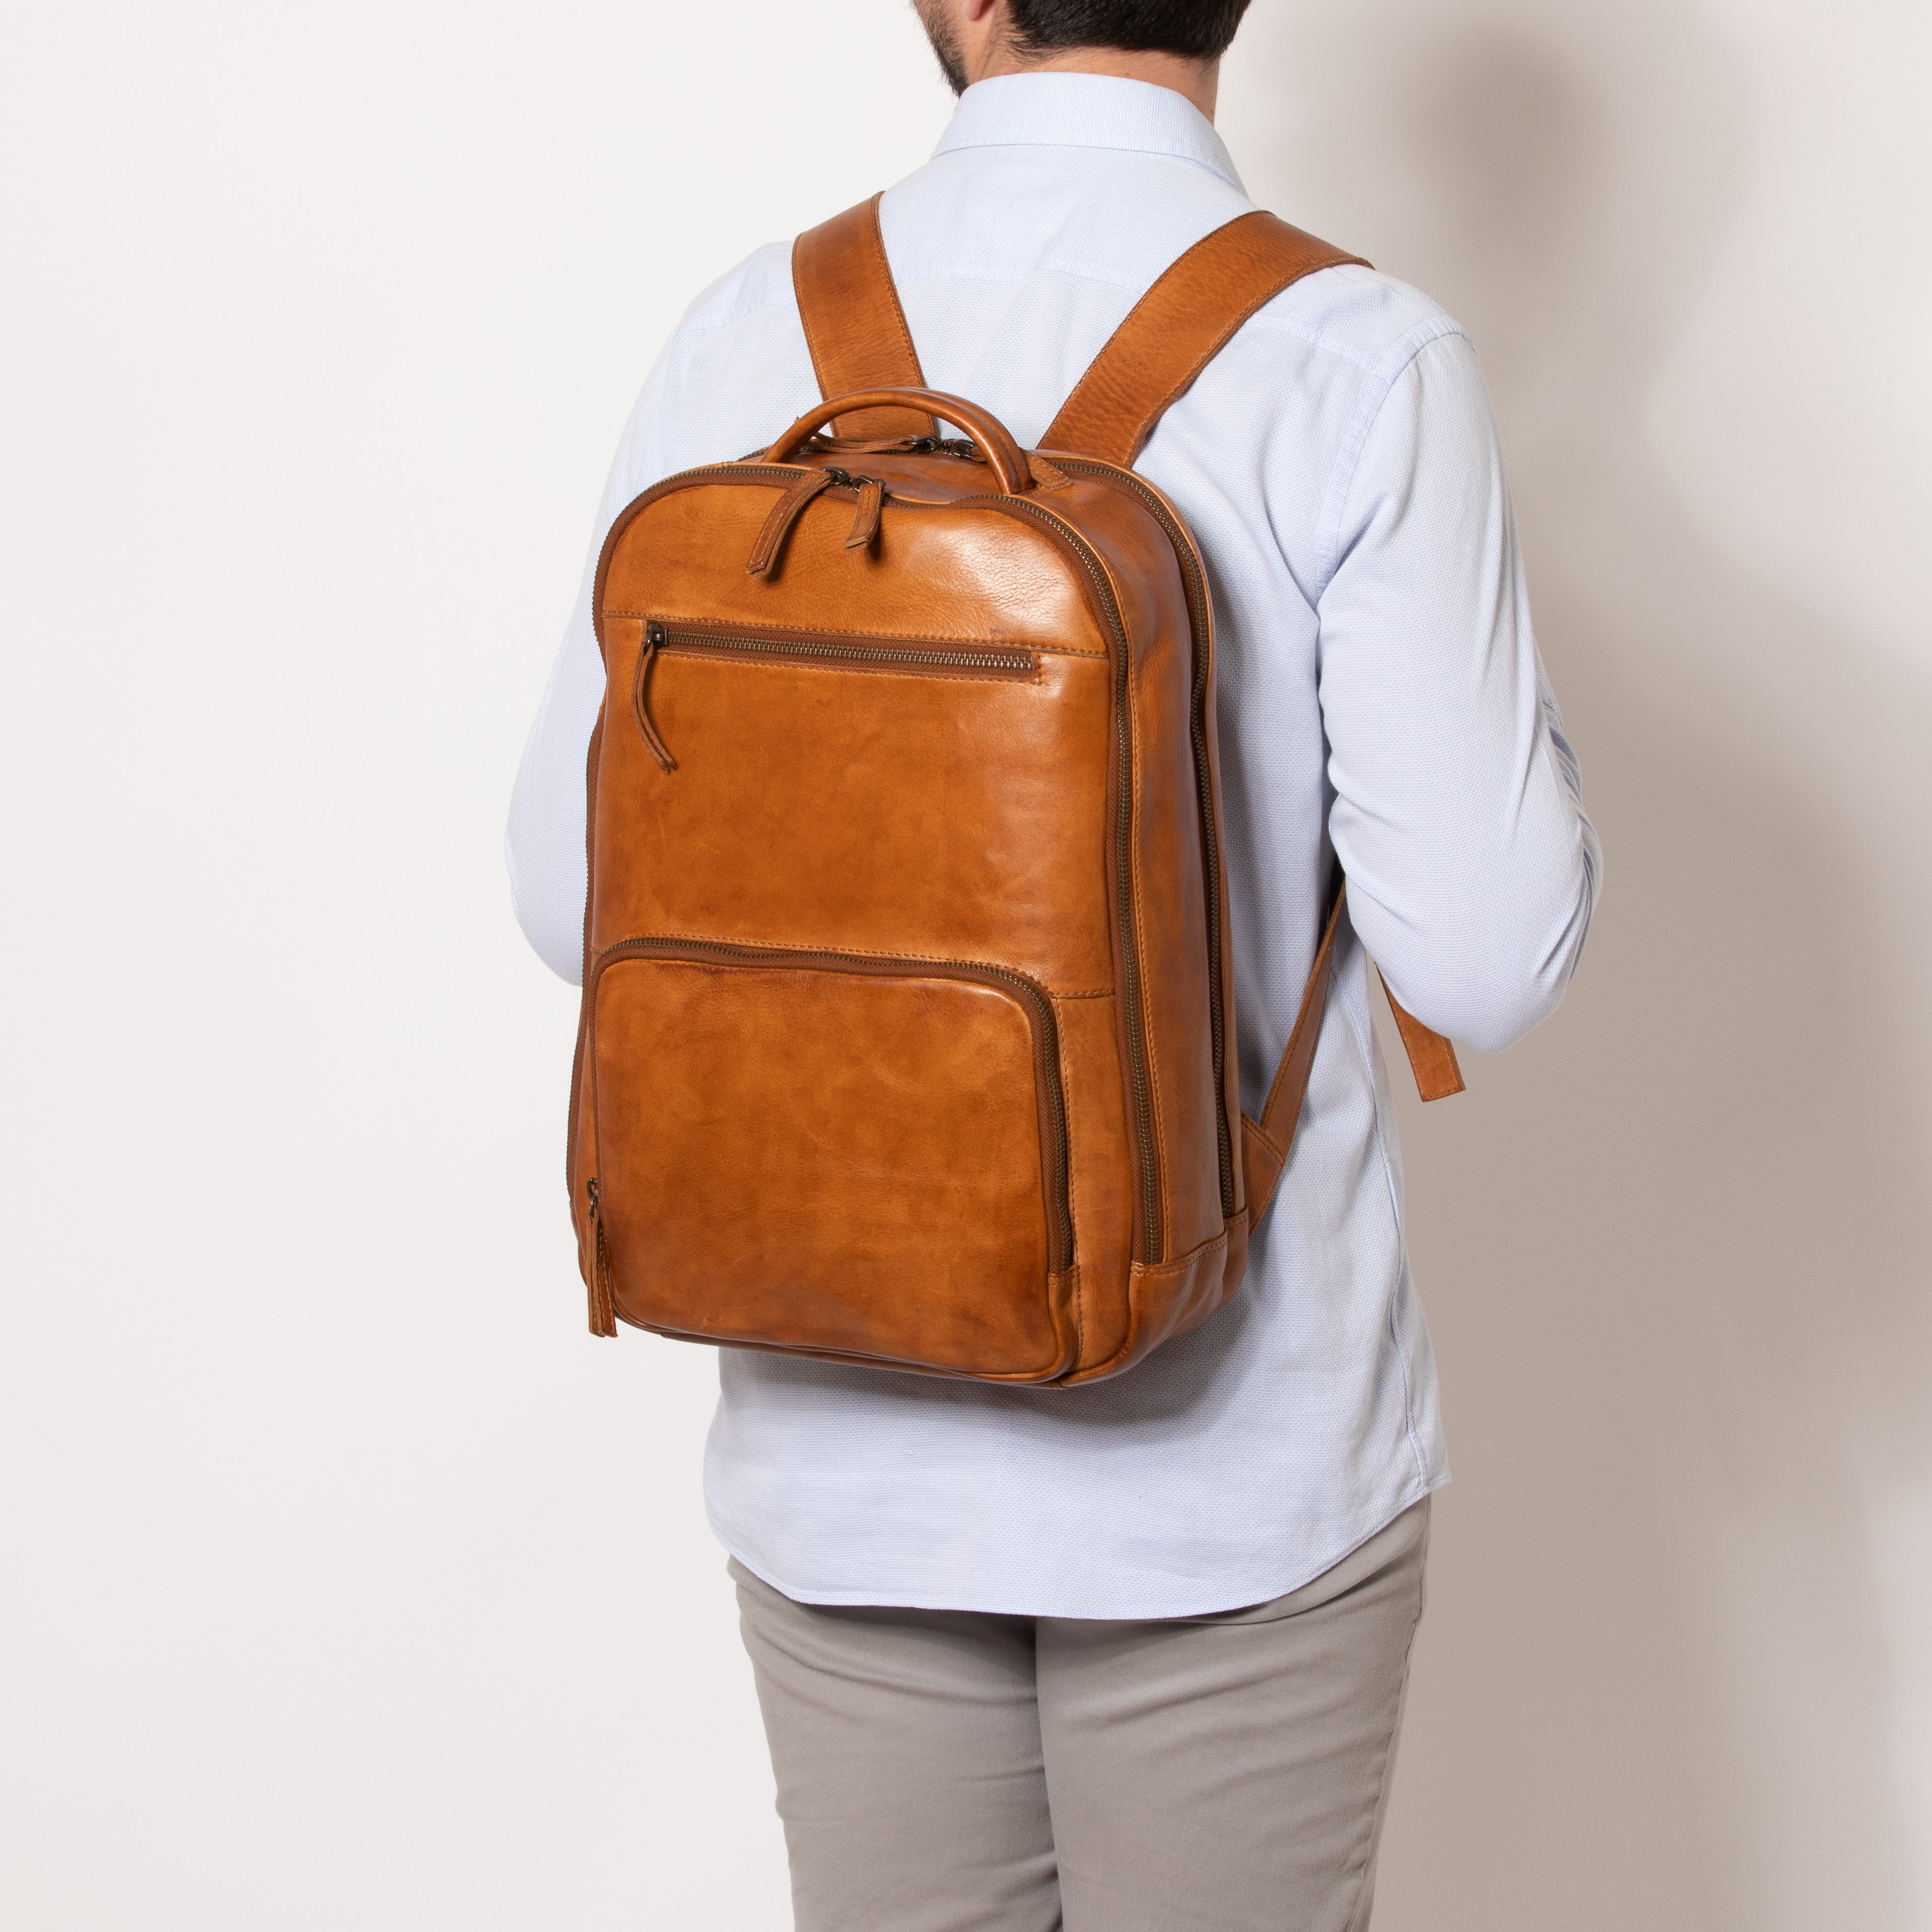 Gianni Conti Cherry Leather Backpack